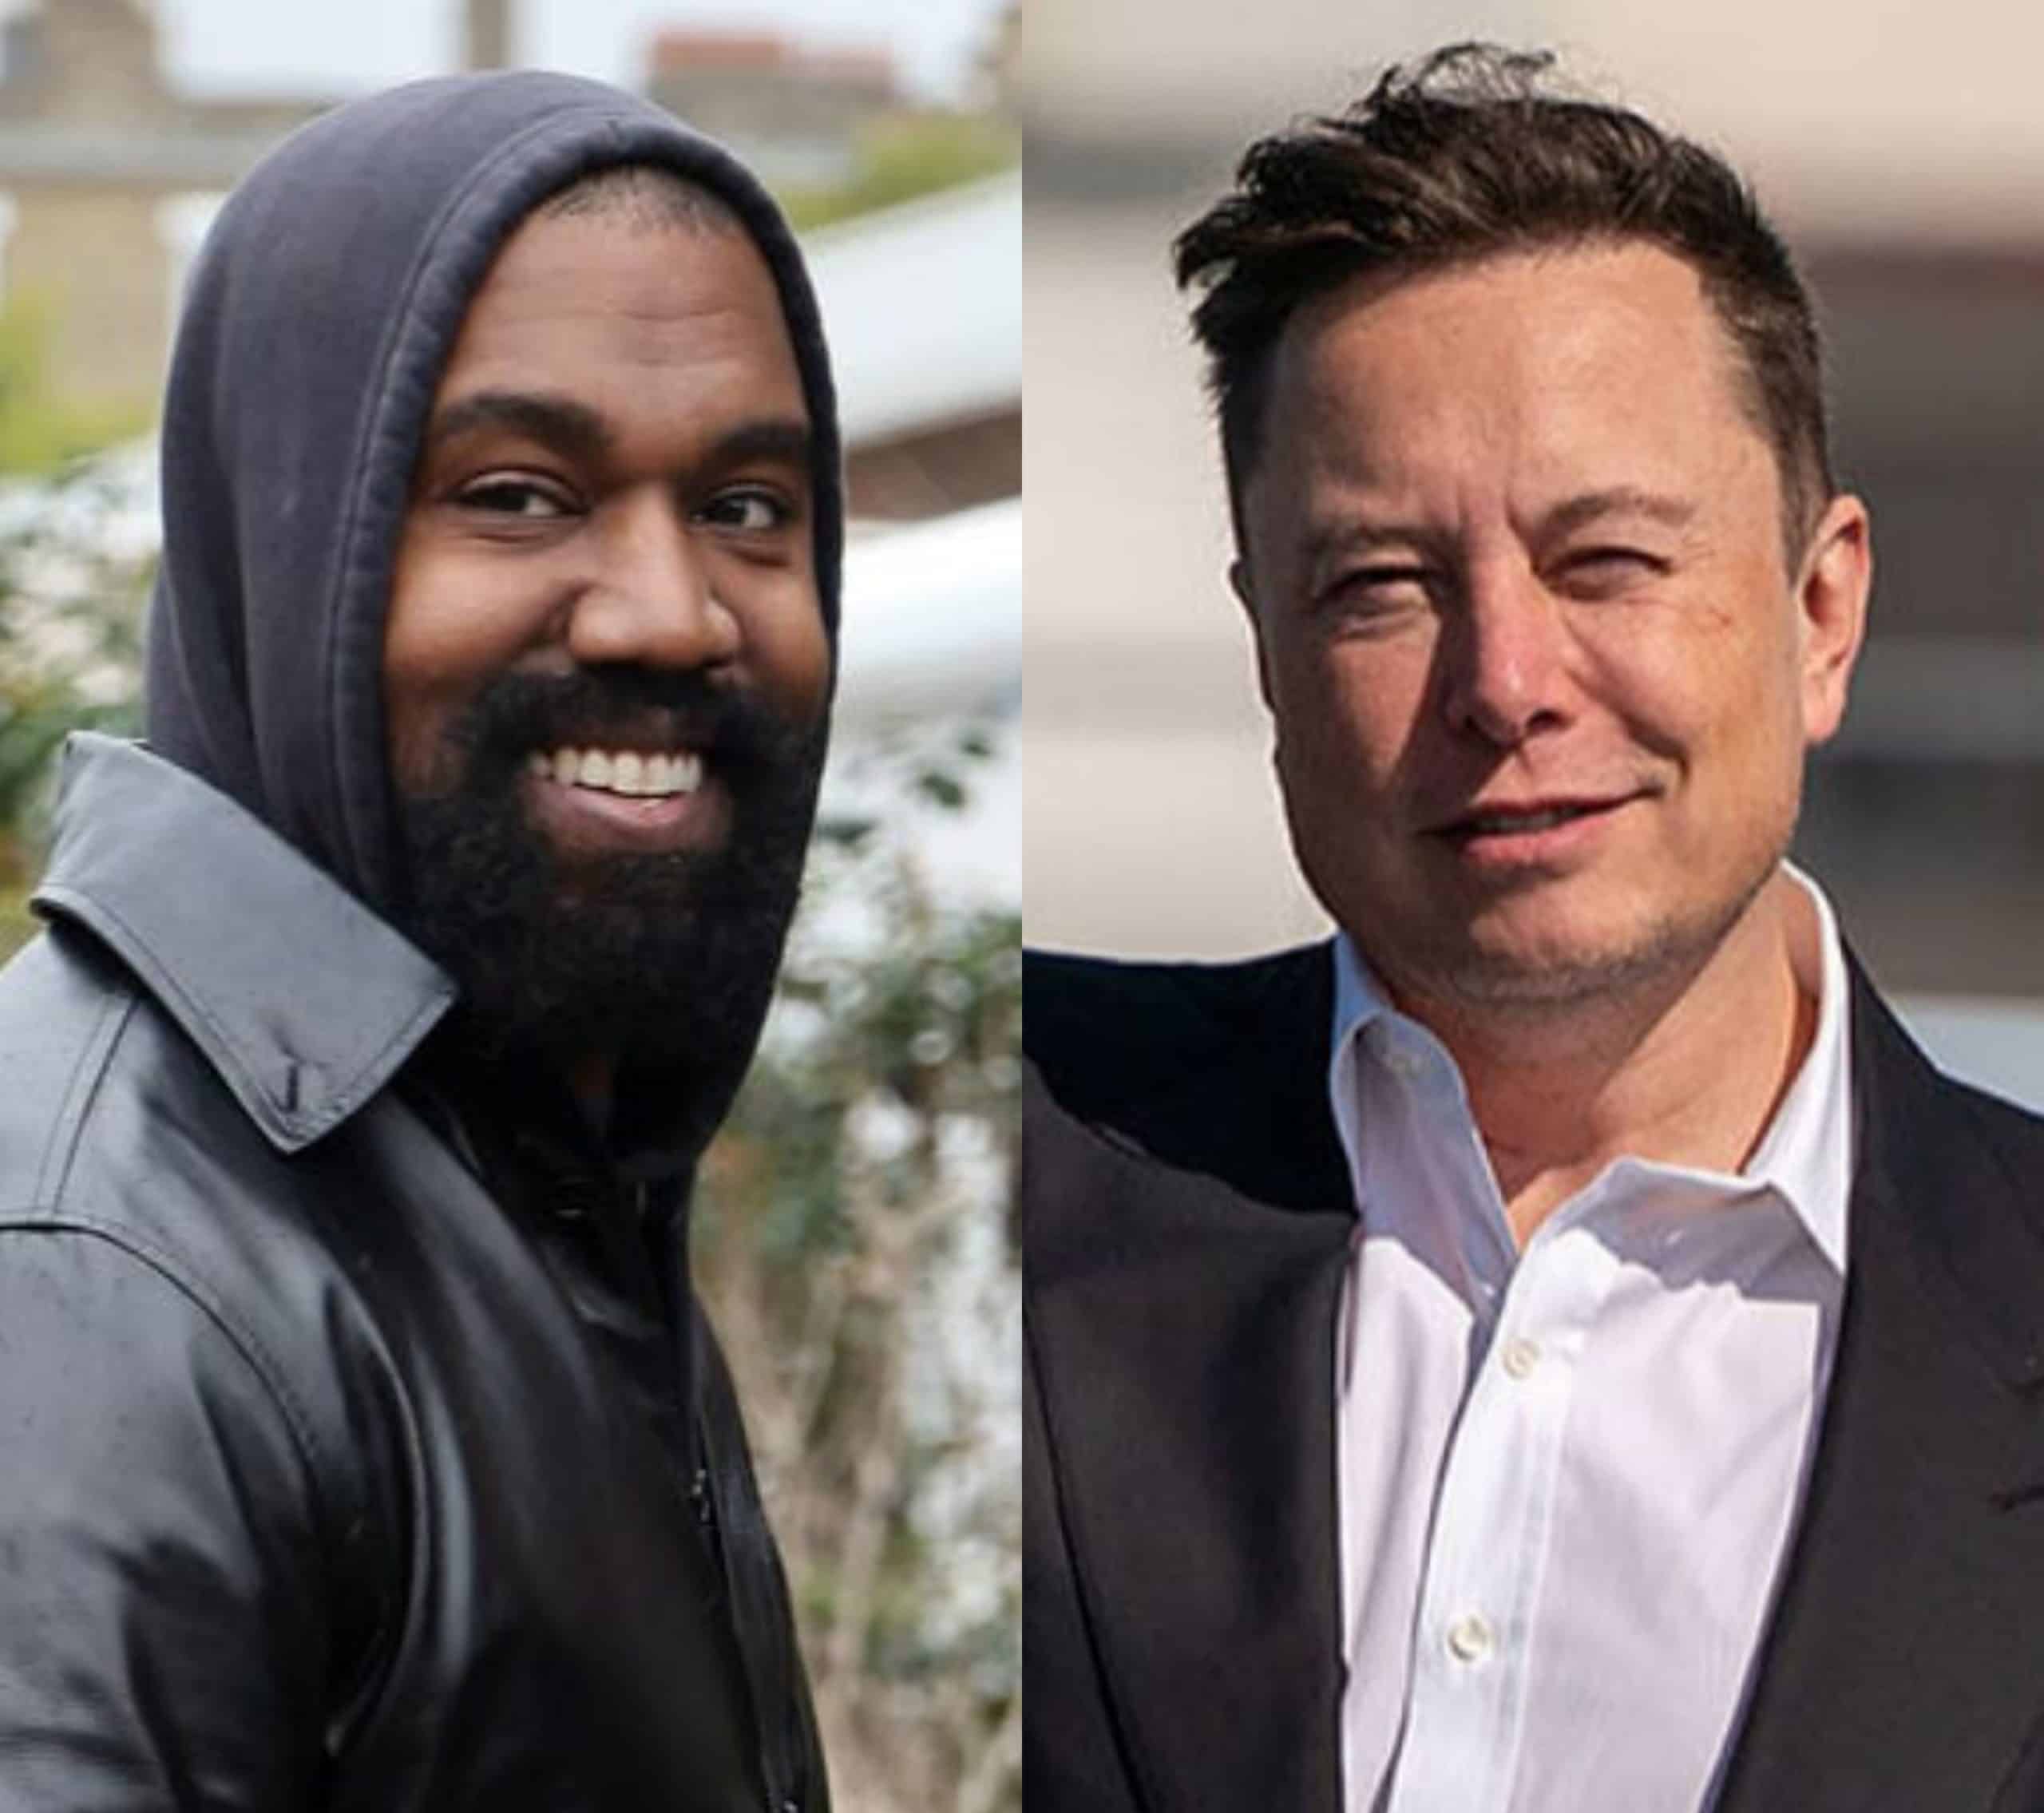 Elon Musk Says He Wanted To Punch Kanye West For Posting Swastika Picture On Twitter